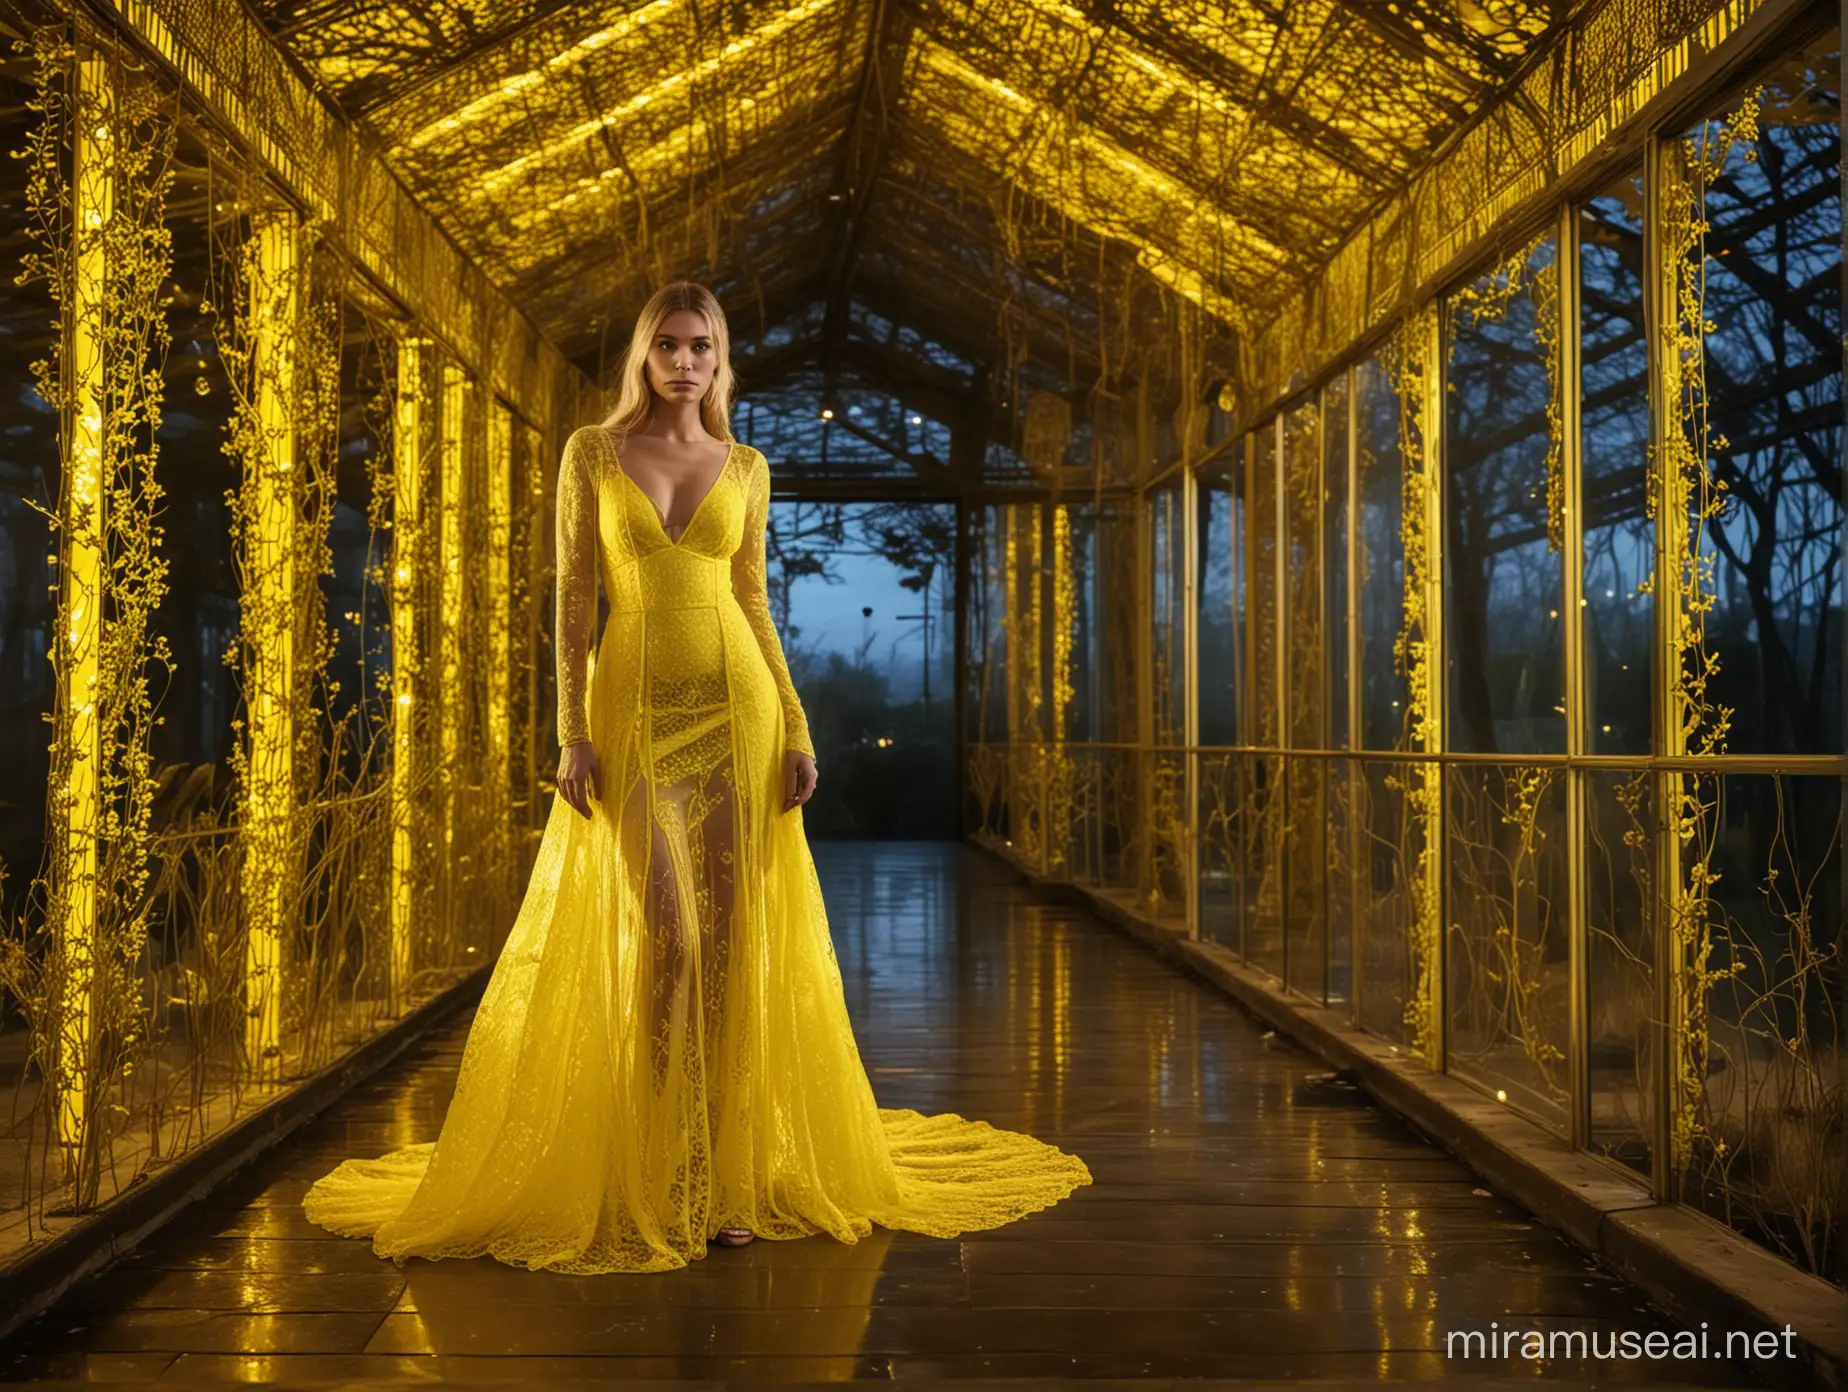 A female model in a designer yellow lace gown with neon leds, in a glass house, in
the style of Chad Stahelski